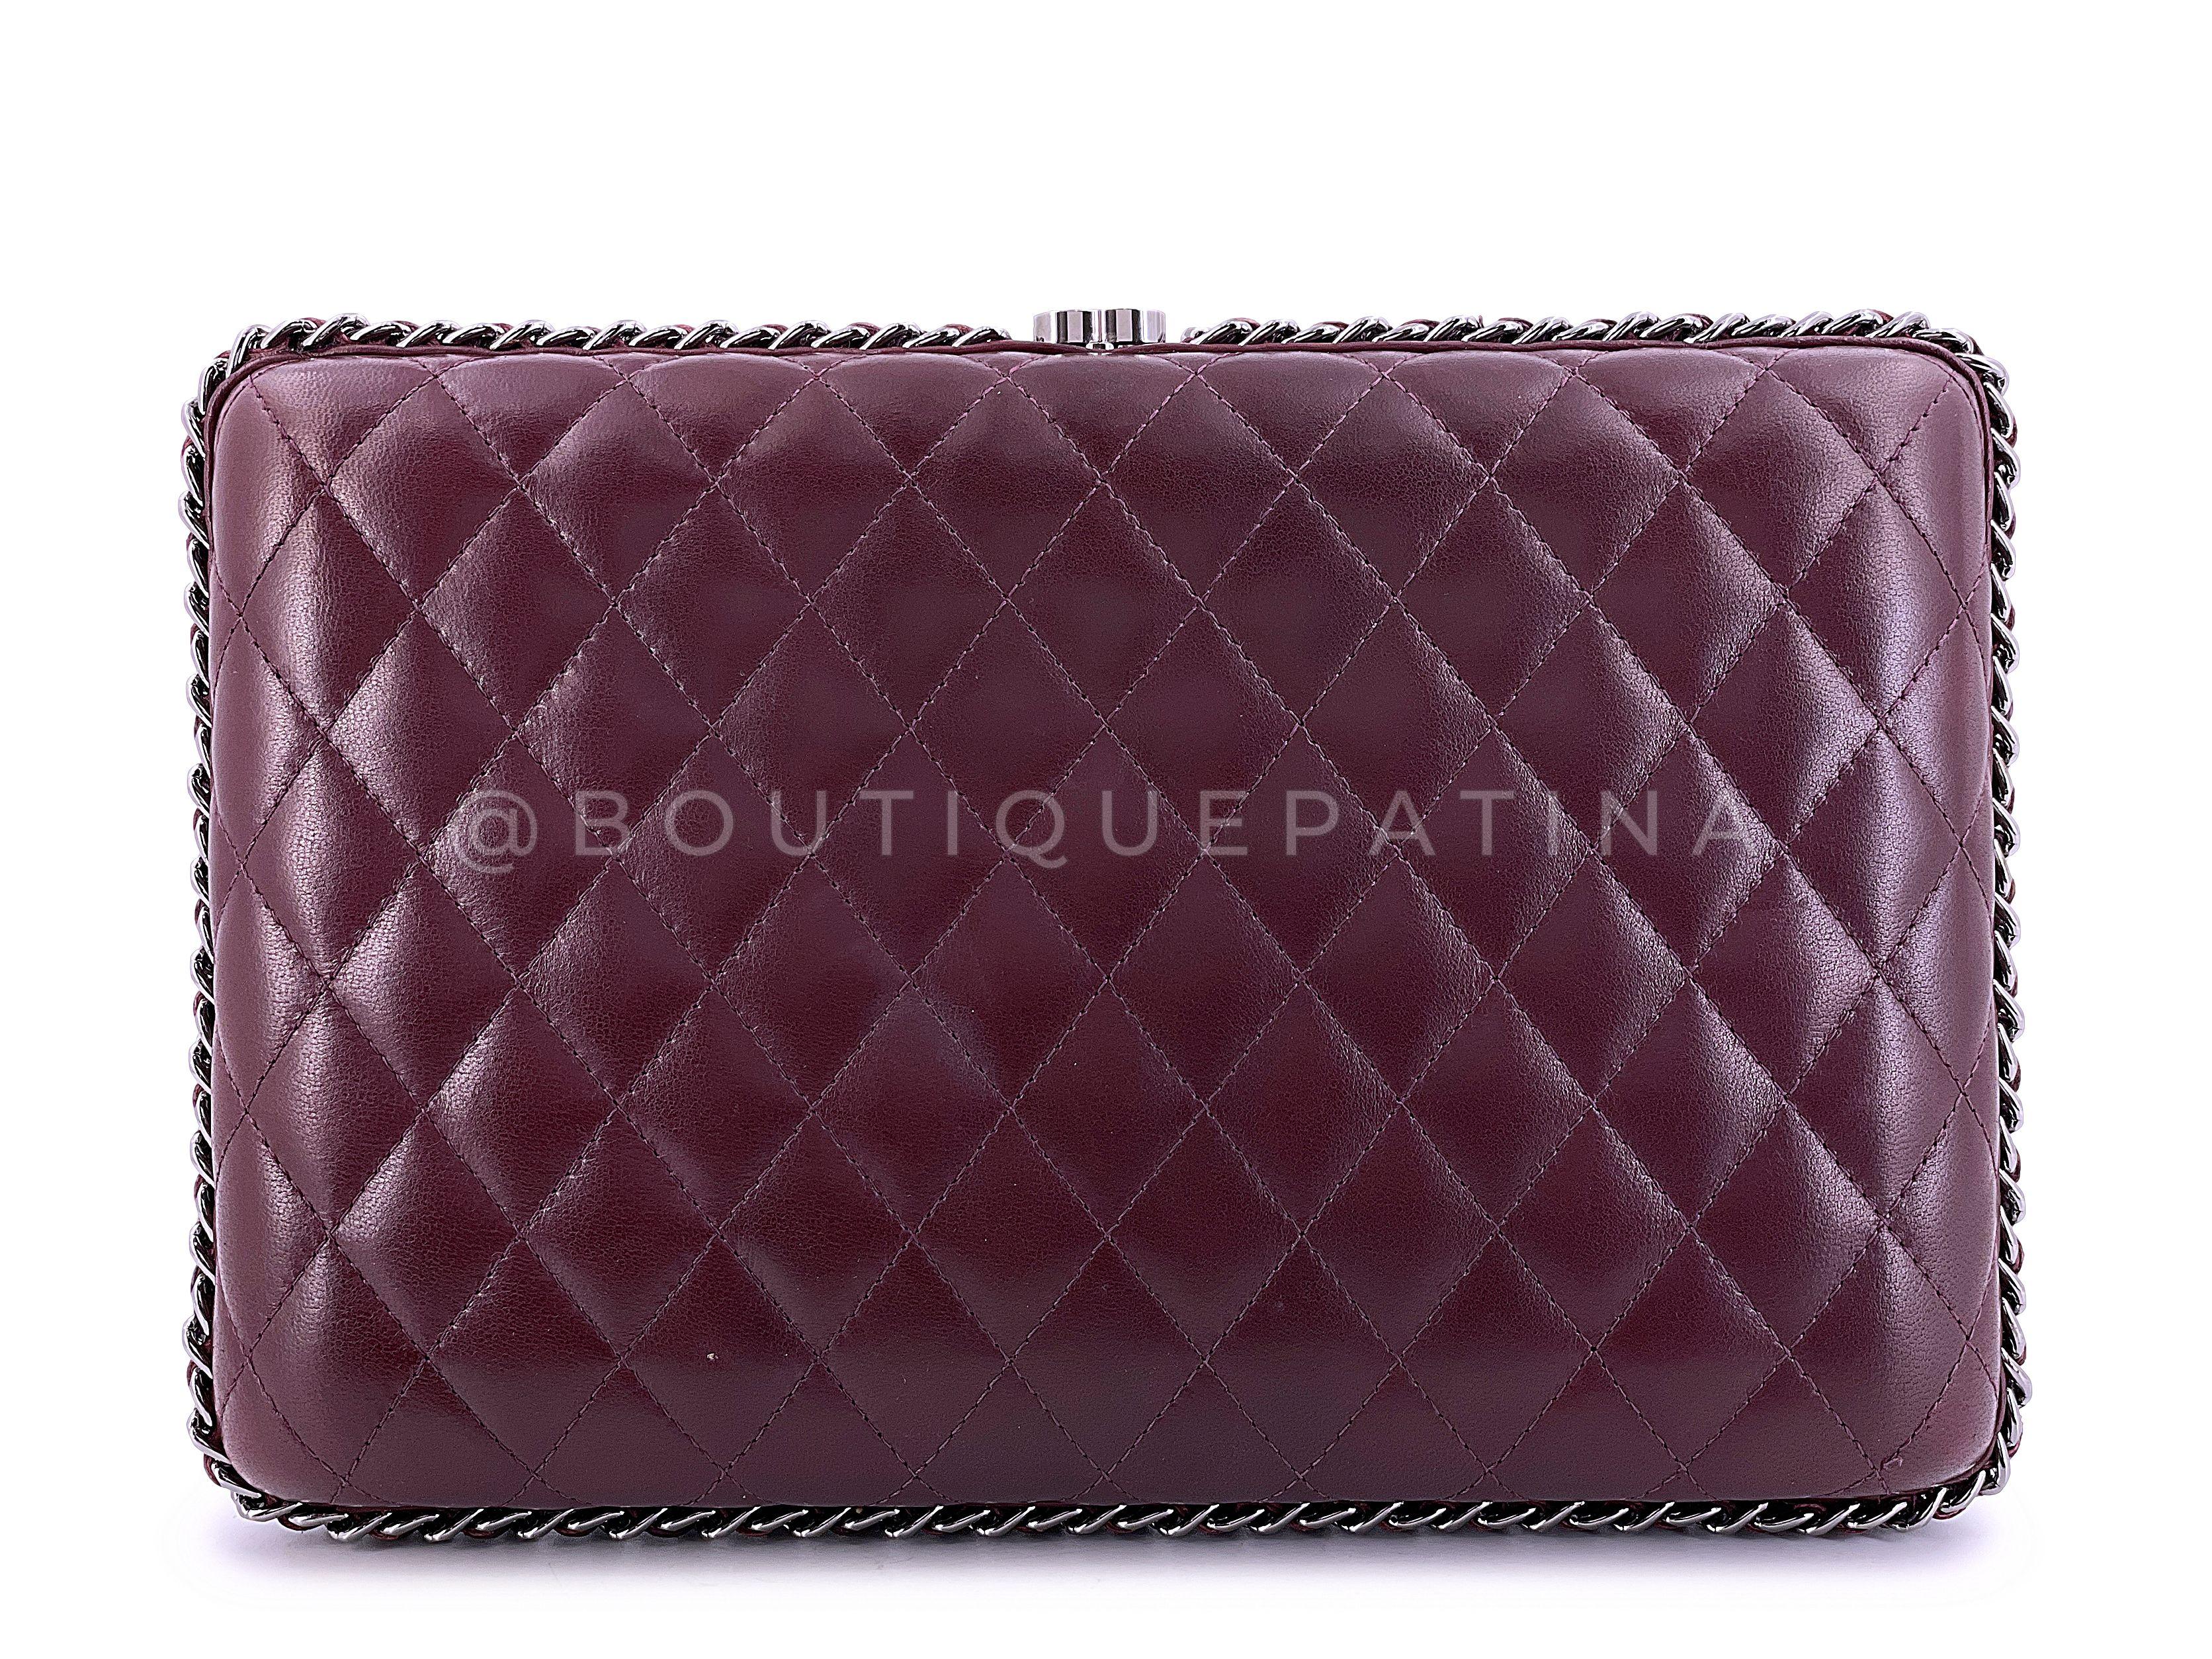 Store item: 67849
Chanel 2012 Bordeaux Burgundy Oversizsed Hard Quilted Chain Around Clutch Bag RHW is a very unique bag that one will be very hard pressed to find anywhere else.

For 20 years, Boutique Patina has specialized in sourcing and